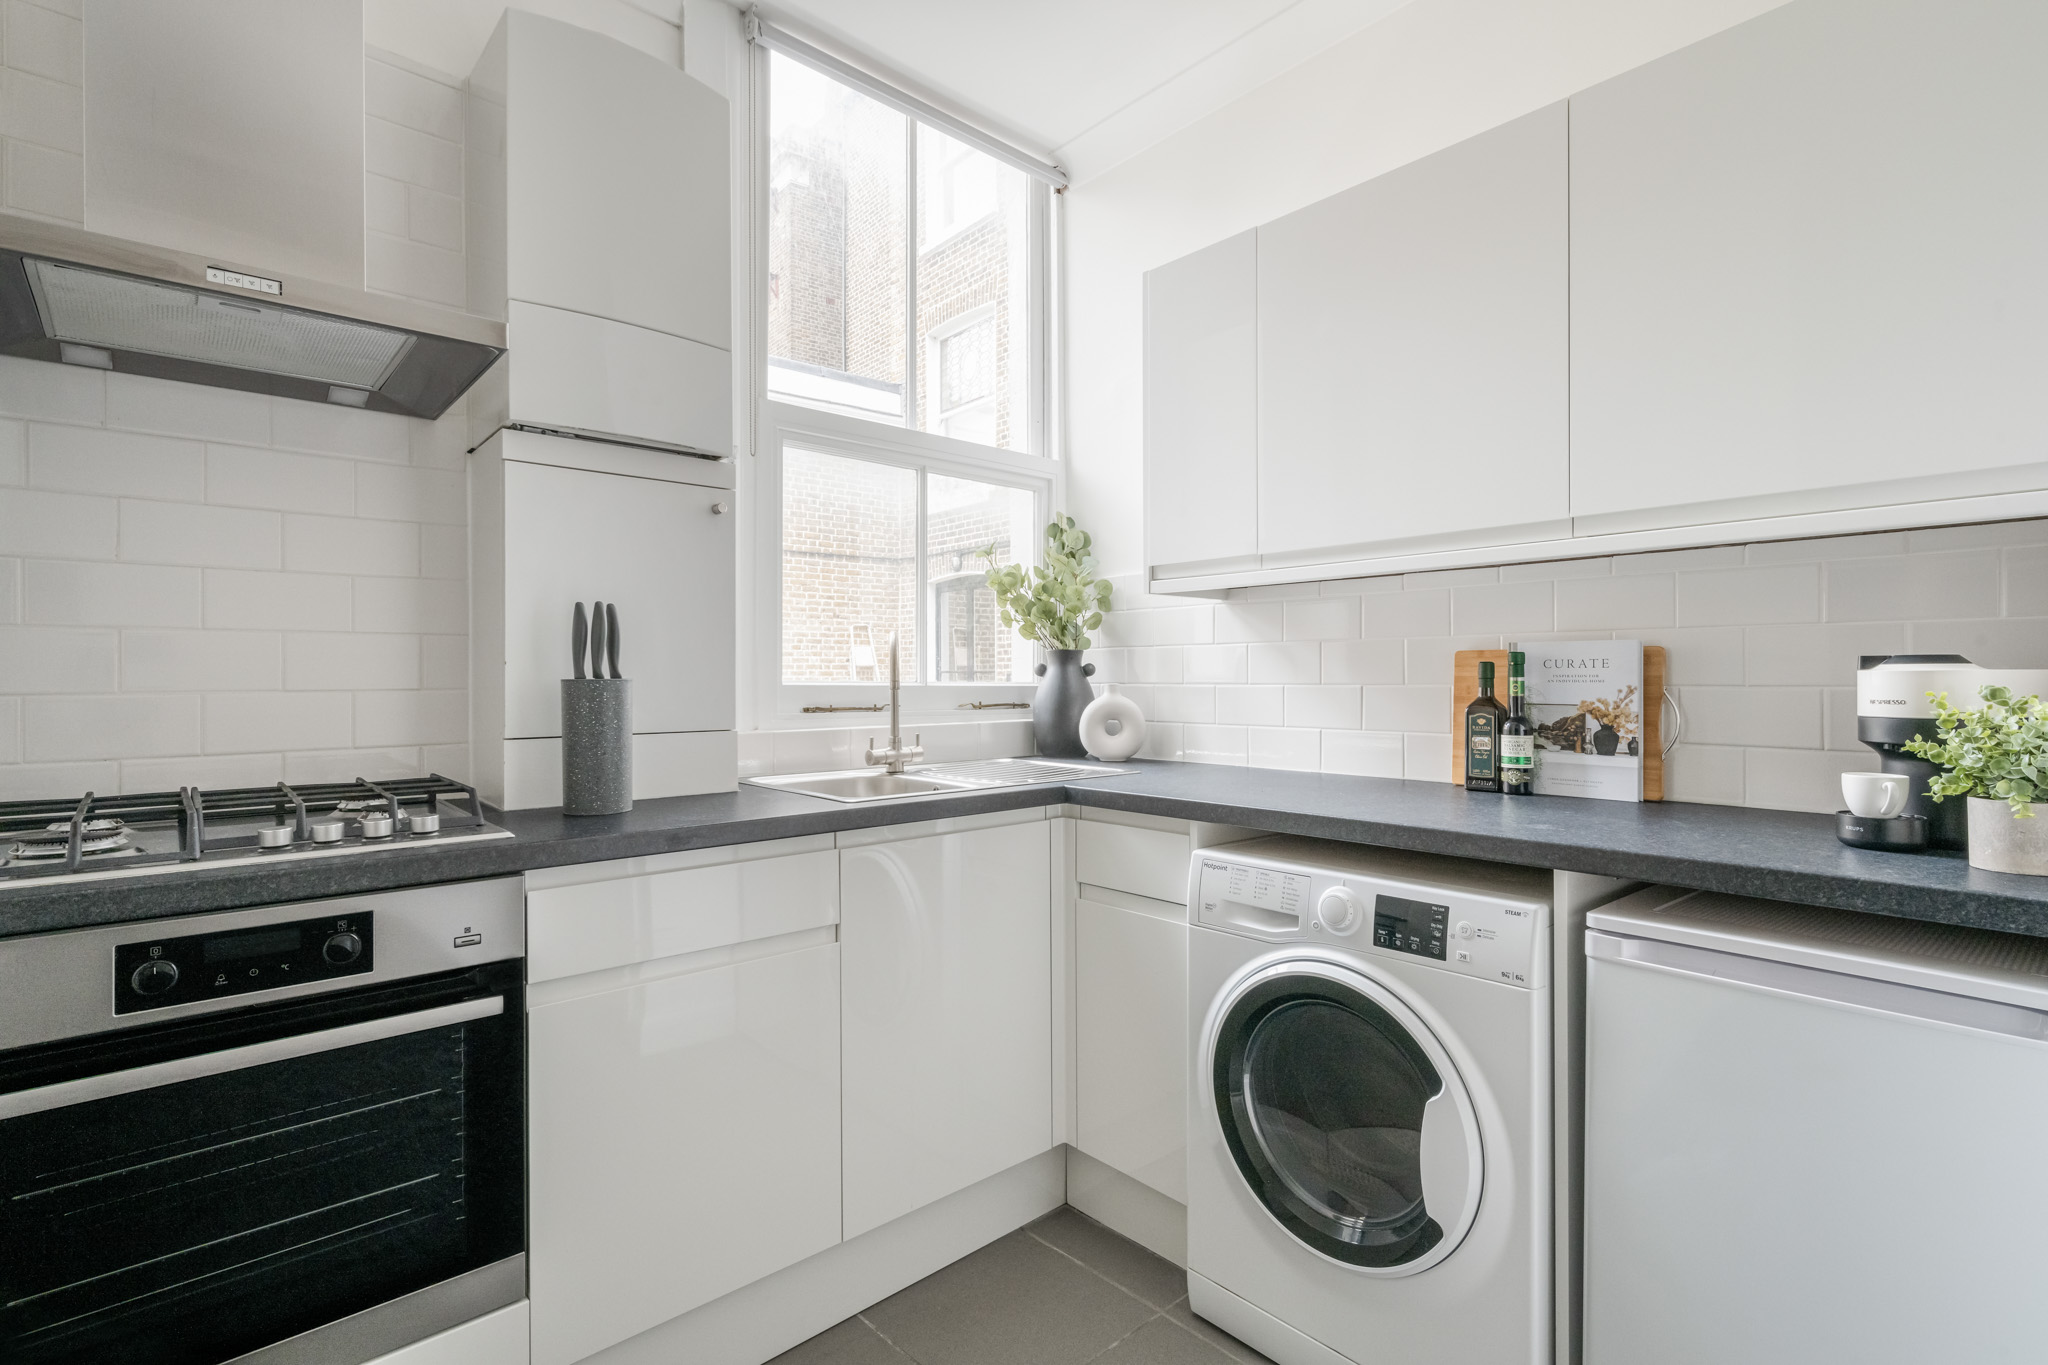 Kitchen - One Bedroom Apartment - Urban Rest Notting Hill - London